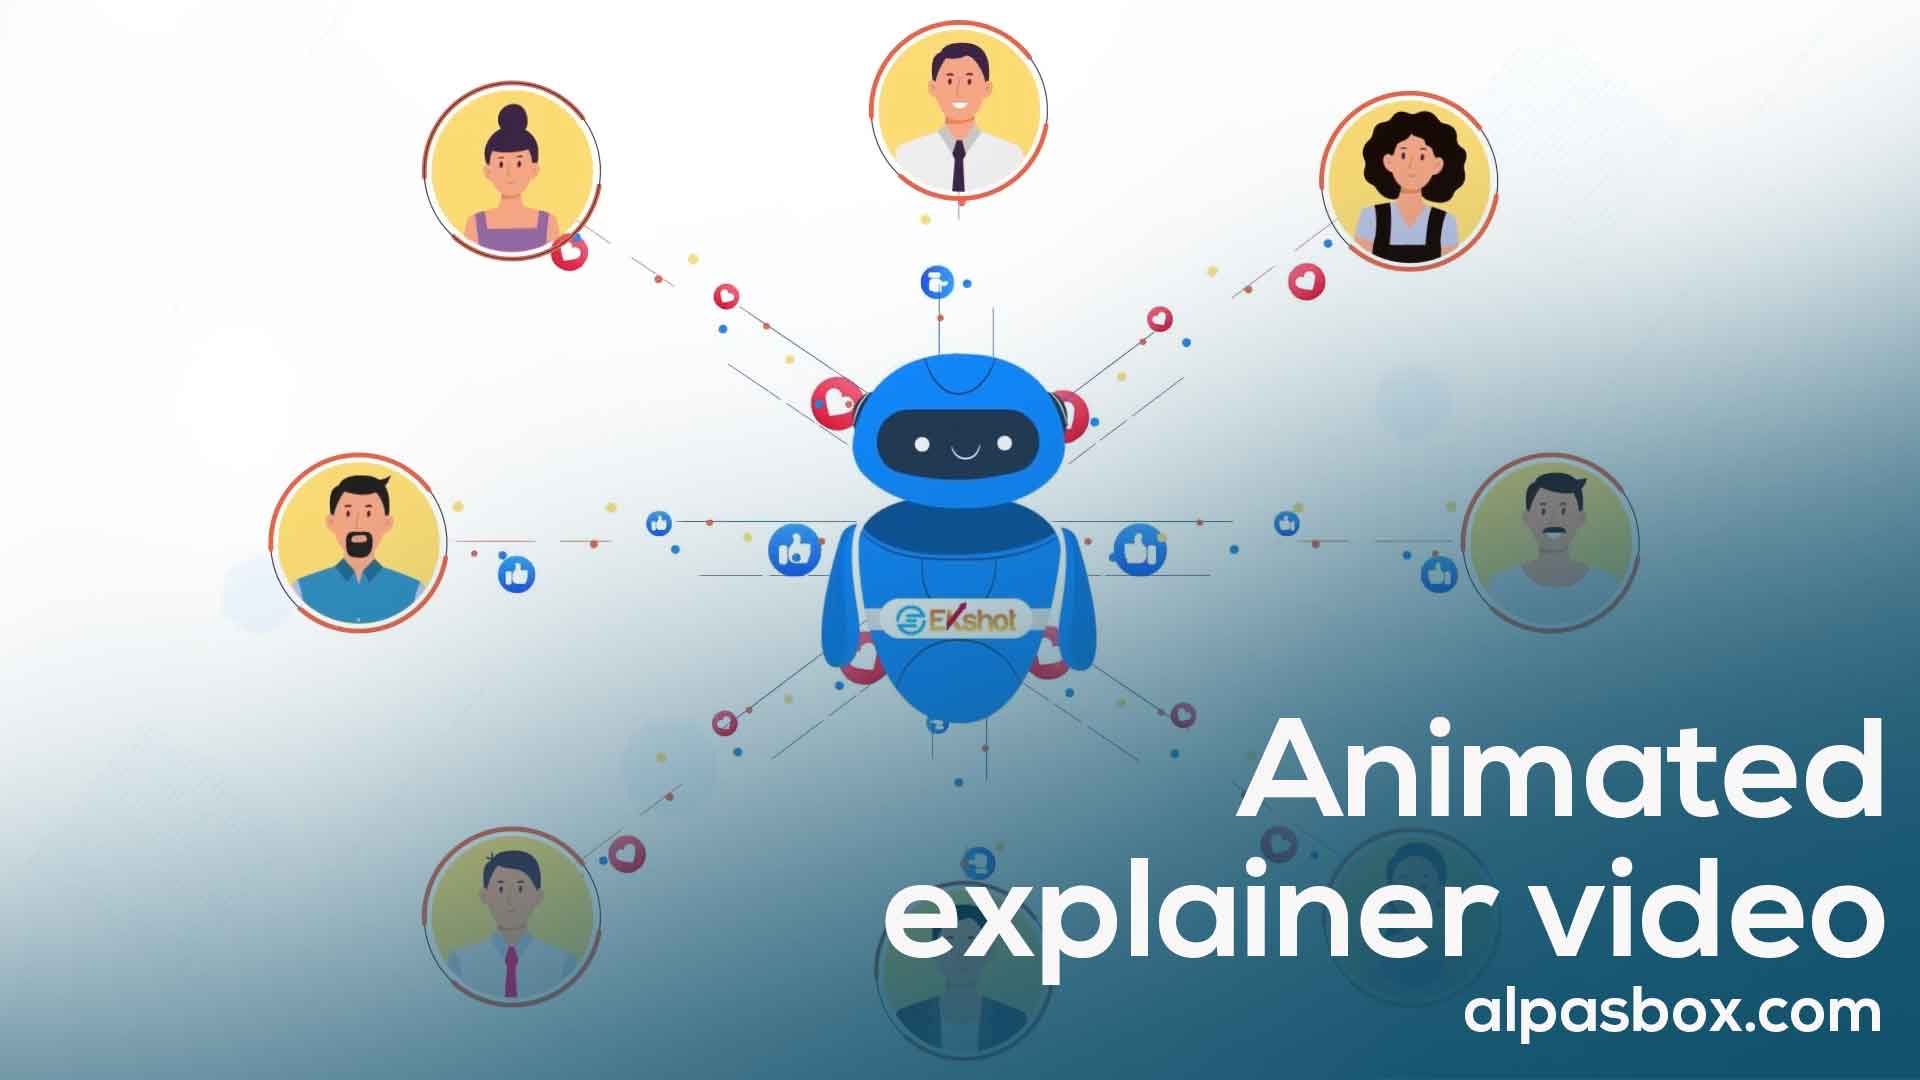 Animated explainer video production company